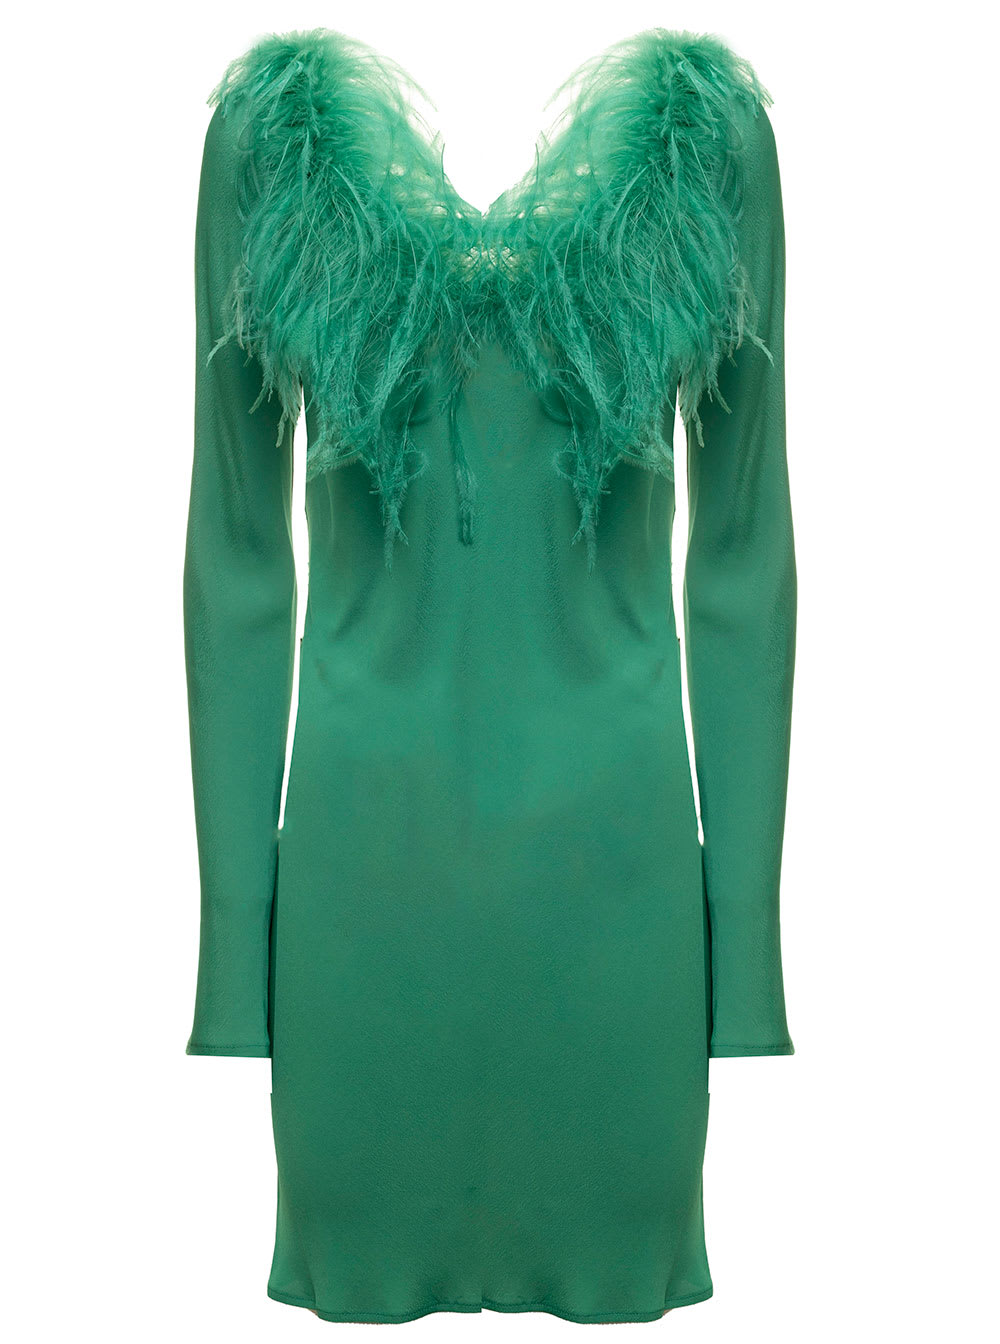 Giuseppe di Morabito Green Crepe De Chine Dress With Feathers Gianluca Capannolo Woman